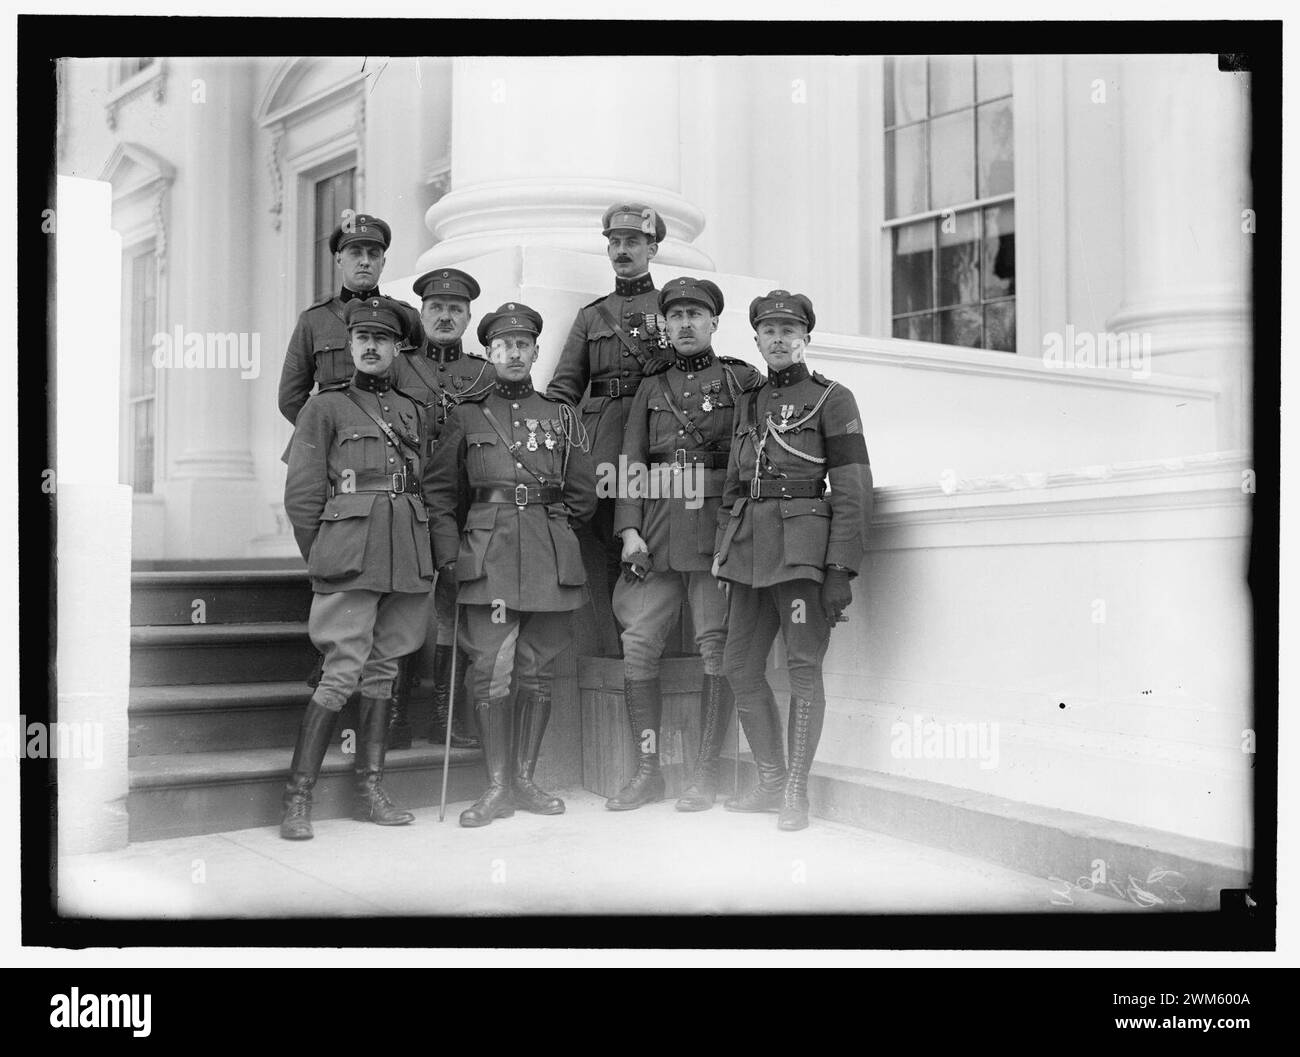 BELGIAN OFFICIALS. SOLDIERS AT WHITE HOUSE Stock Photo